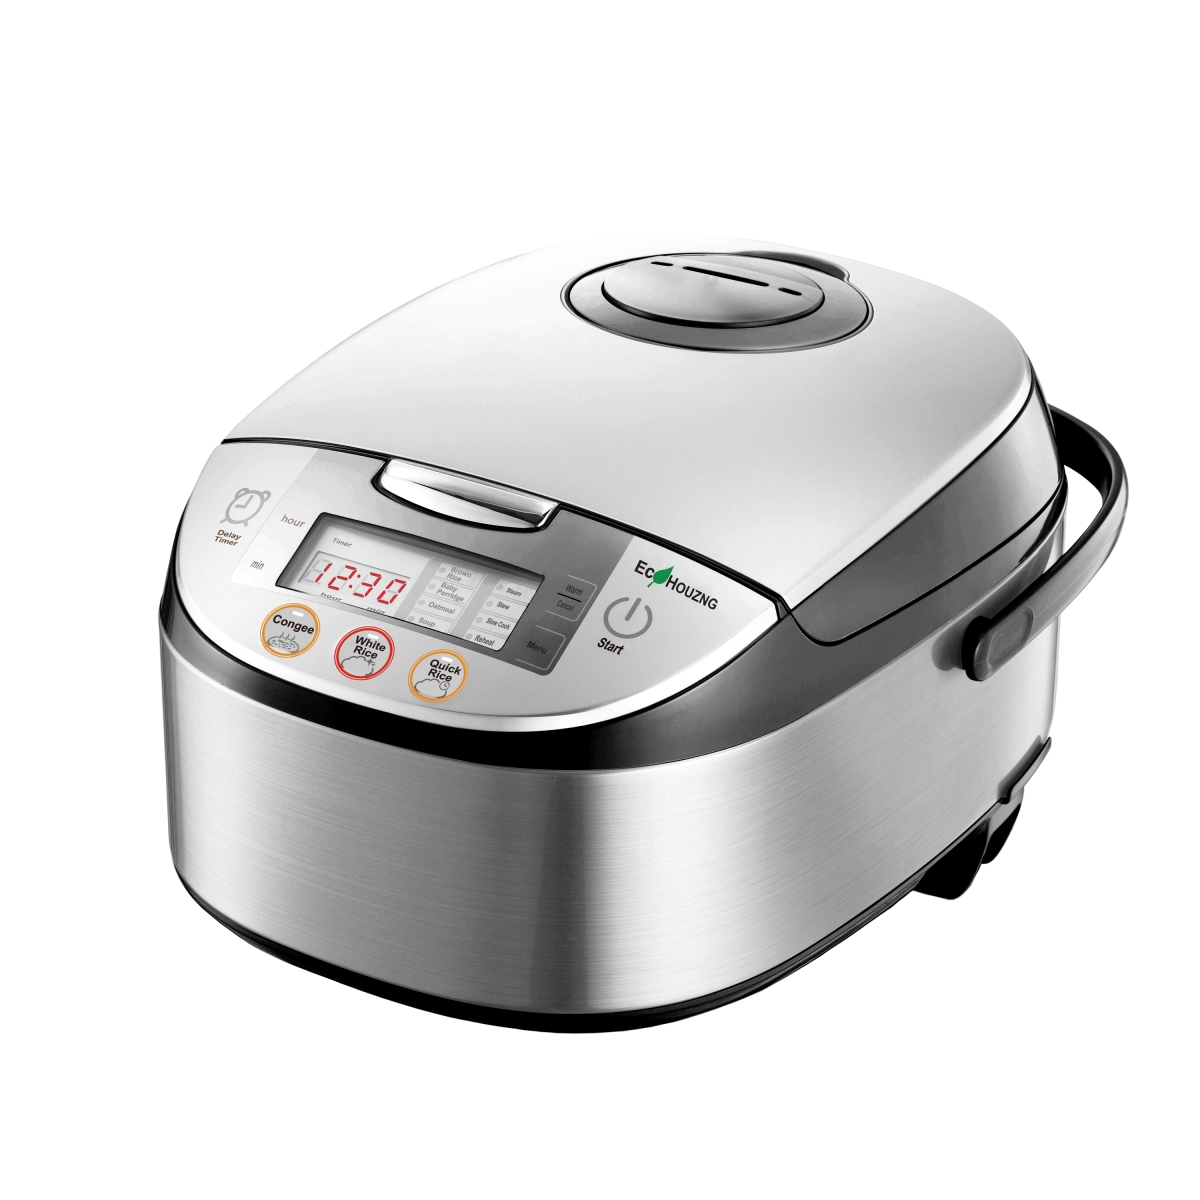 Ecp5015 High Tech Multi-function Rice Cooker